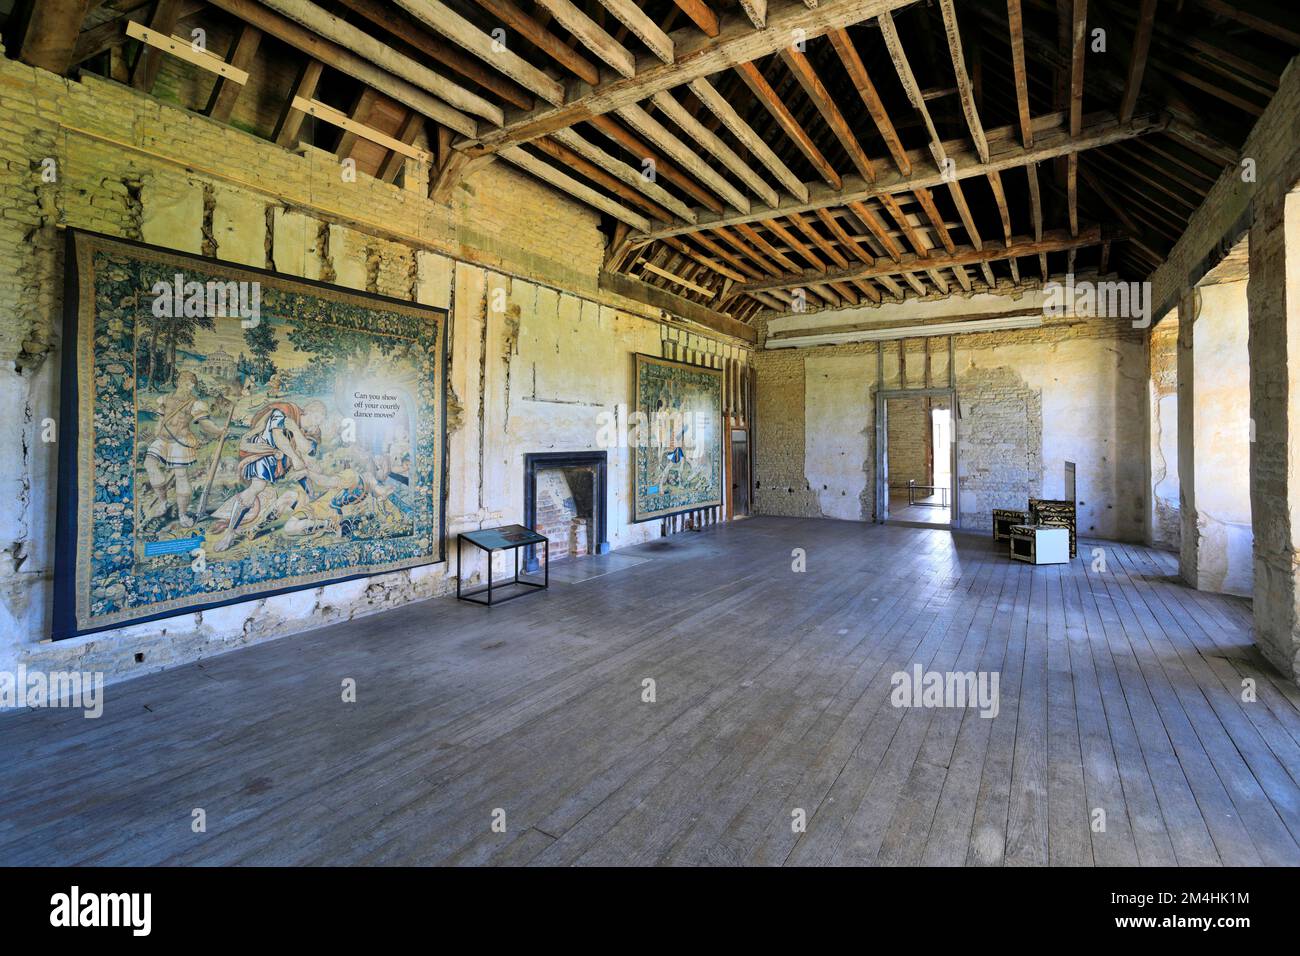 Interior view of Kirby Hall, an Elizabethan country house, near Gretton, Northamptonshire, England Stock Photo